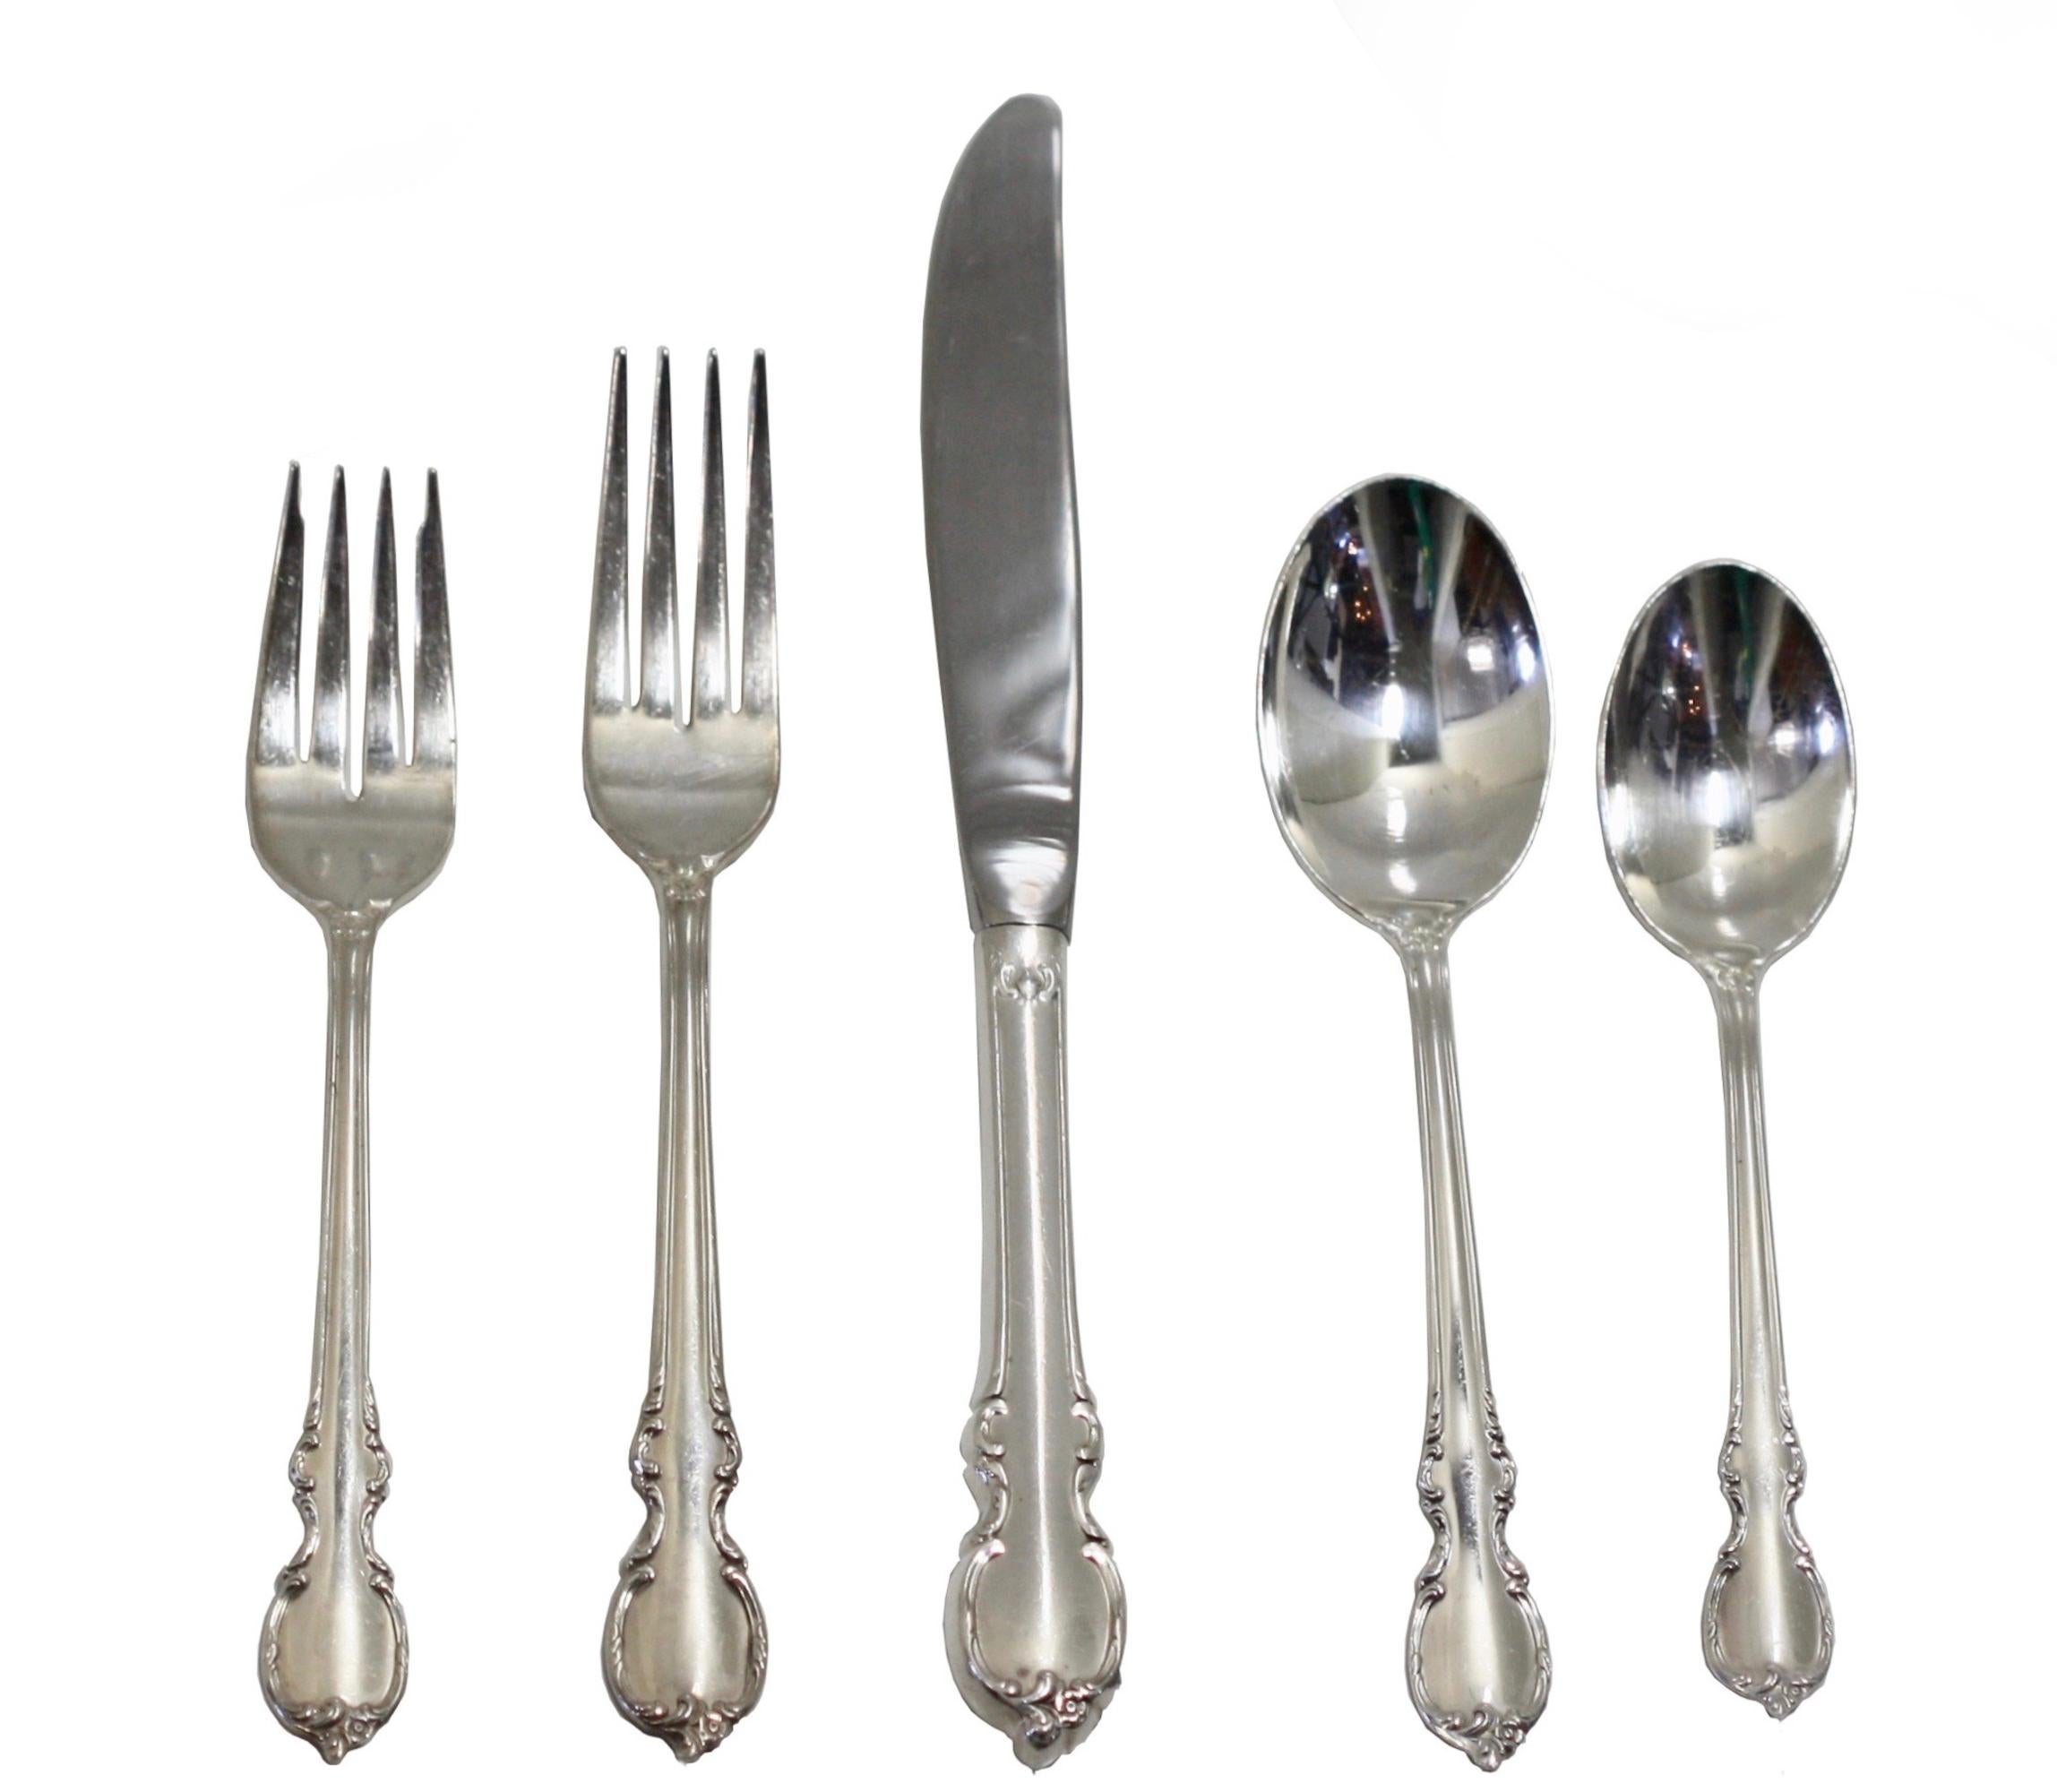 
American Sterling Silver Sixty-Six Piece Part Flatware Service 
Wm. Rogers, Sterling. In the Reflections pattern. Comprising, eleven dinner knives, twelve dinner forks, twelve salad forks, thirteen soup spoons, eleven teaspoons, a butter spread, a